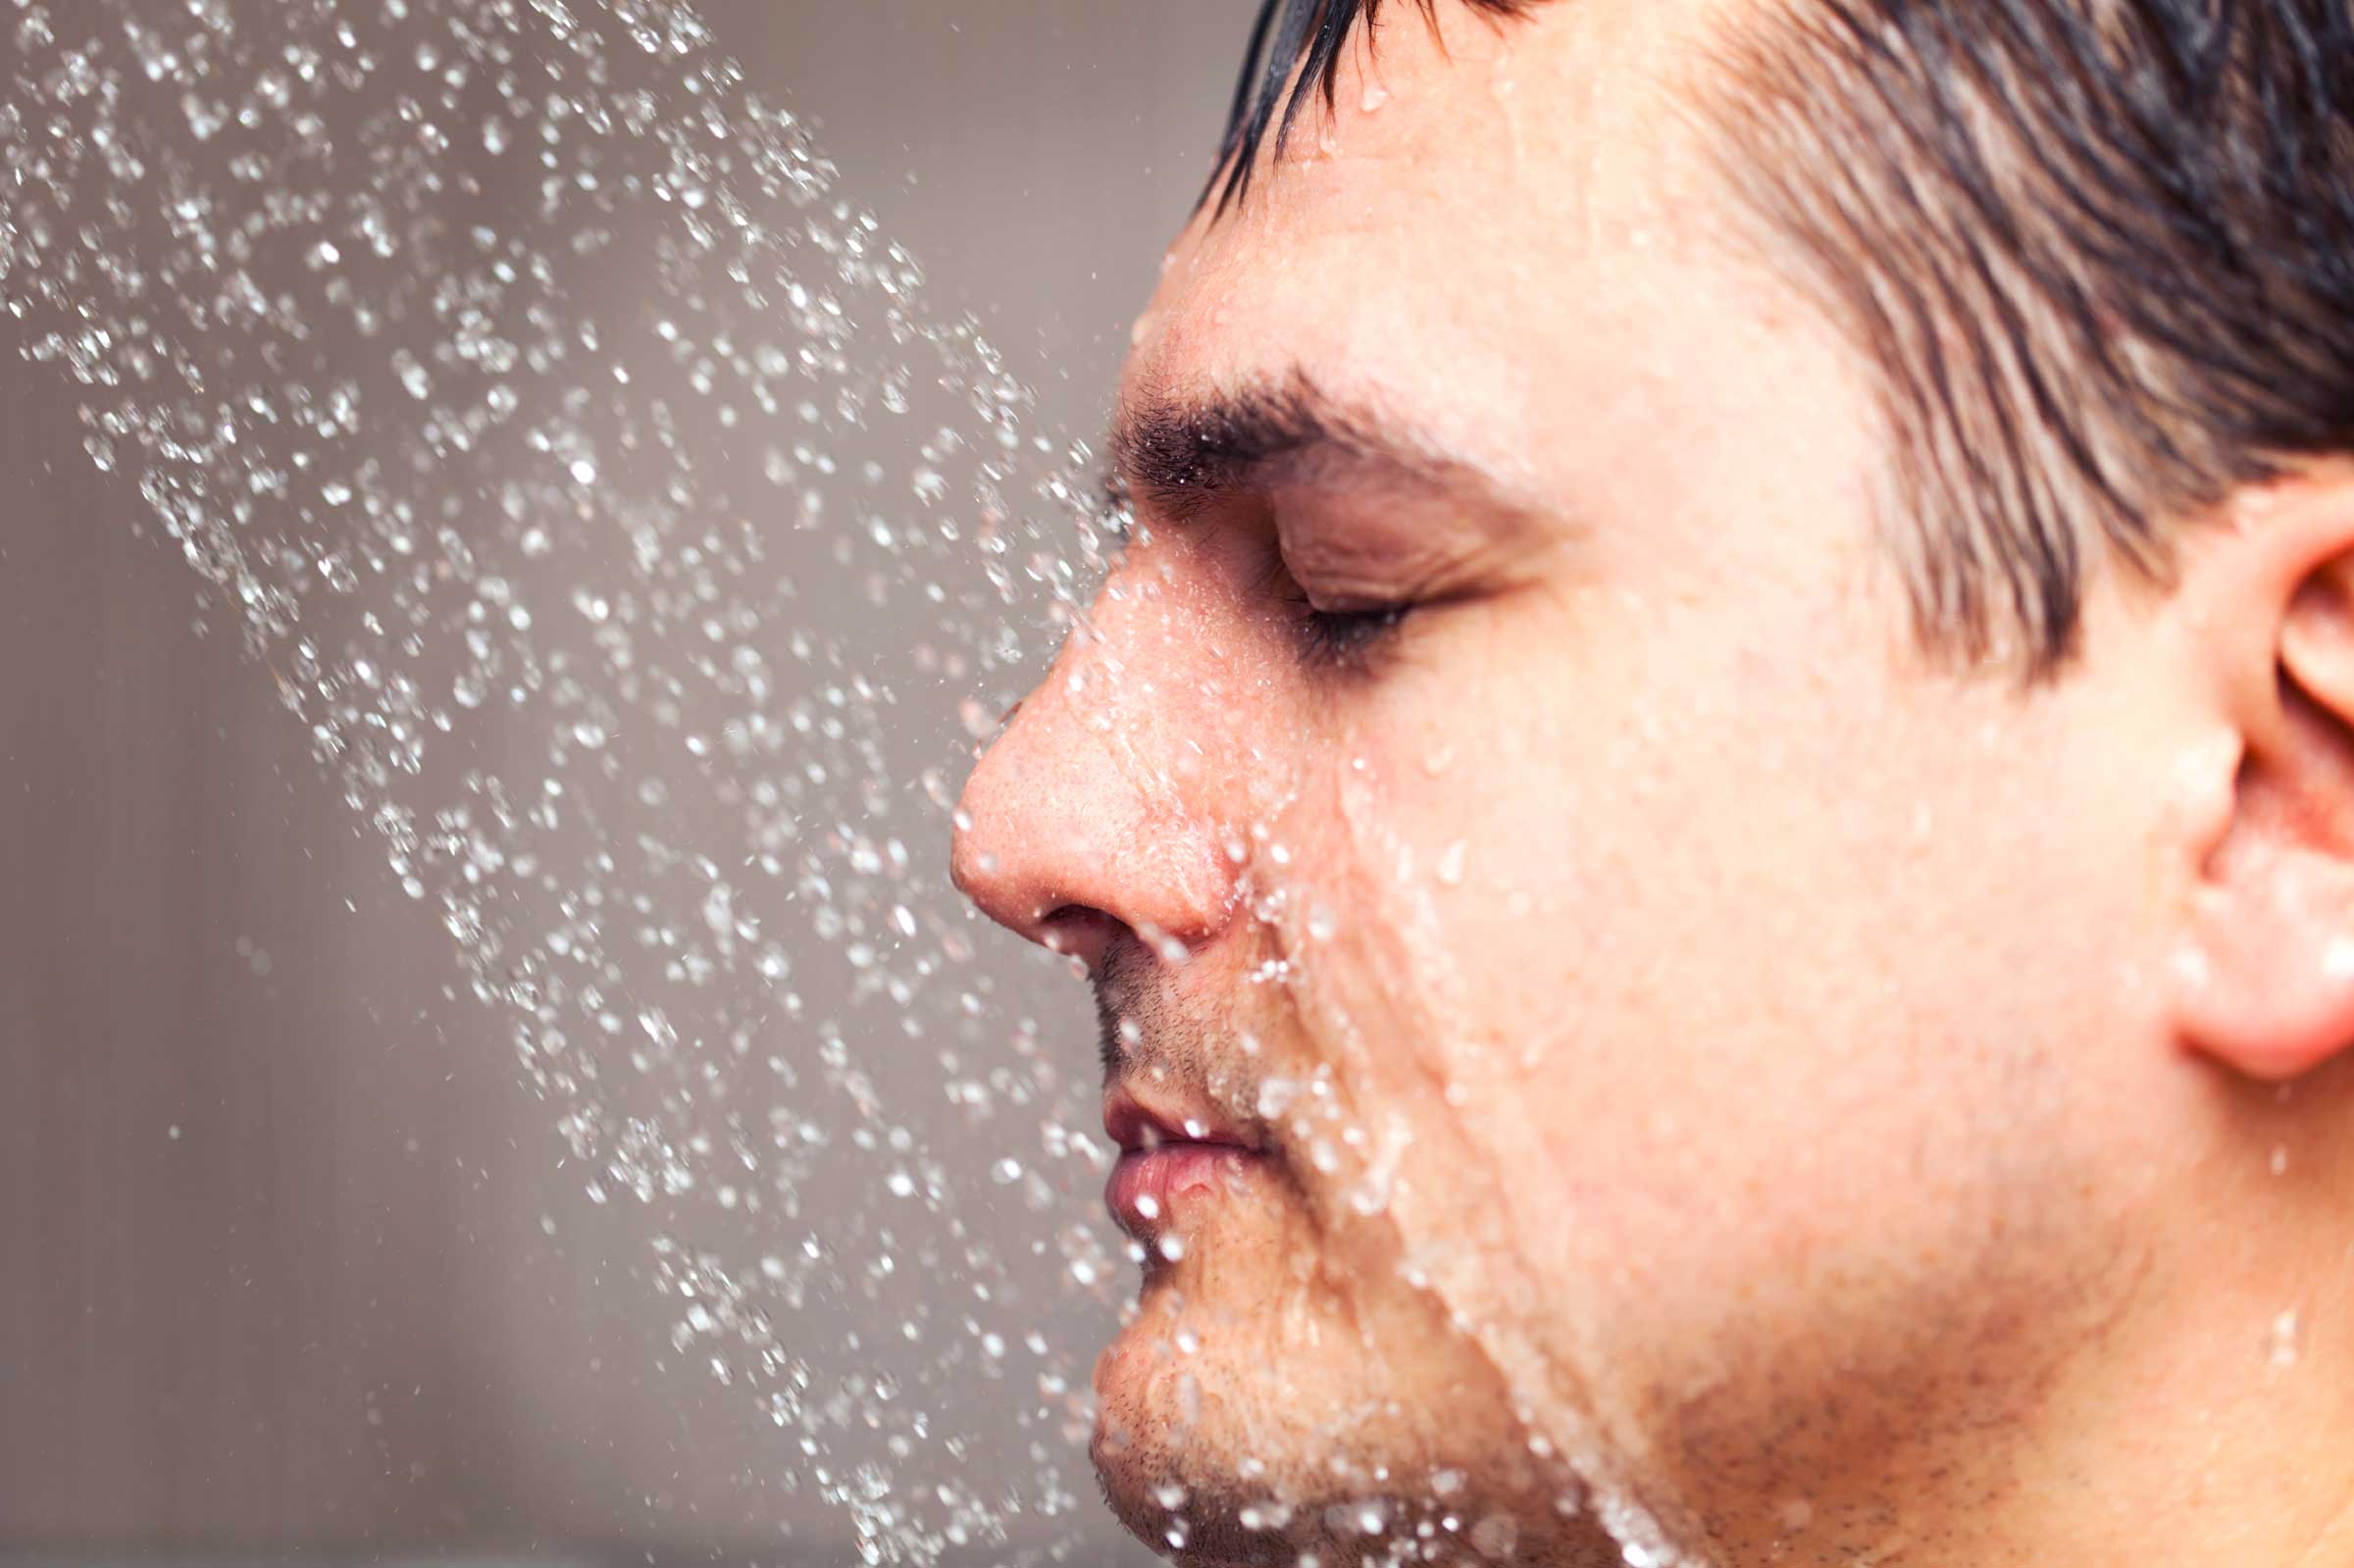 The first body part you wash in the shower can say a lot about your personality